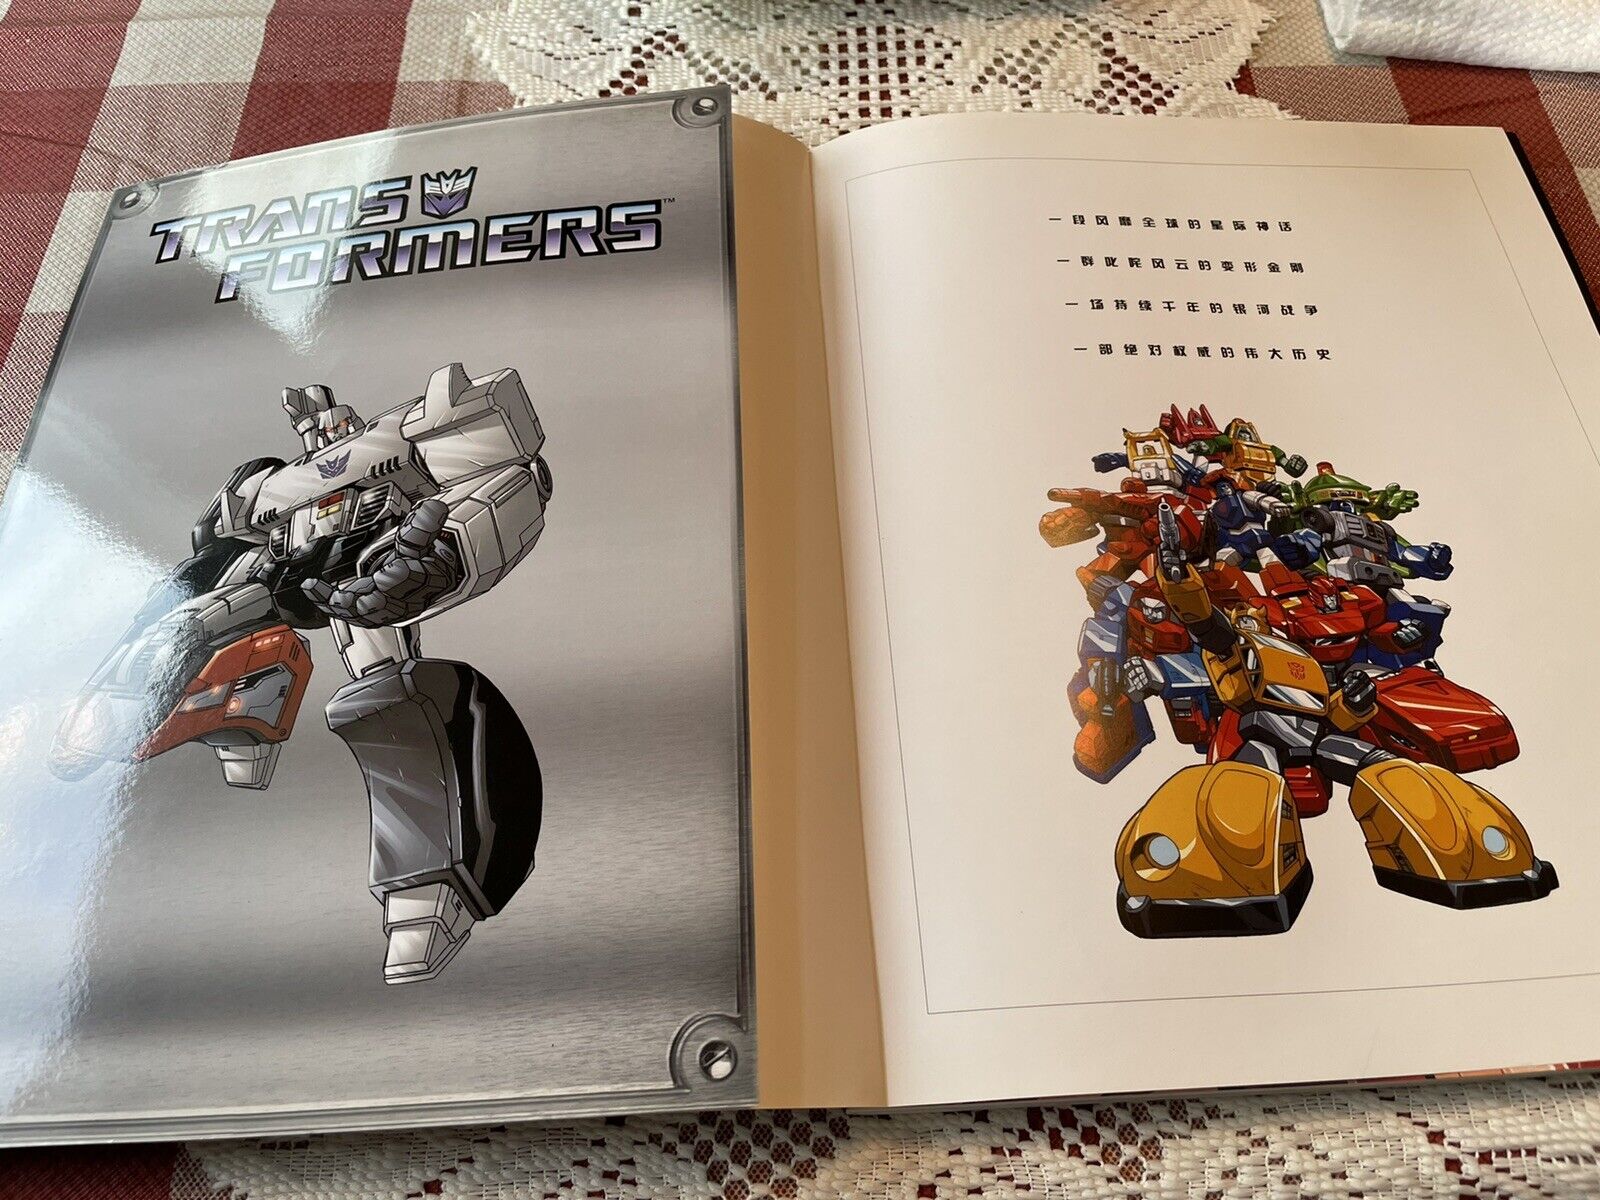 Transformers The Ultimate Guide Book Simon Furman 2007 DK Chinese